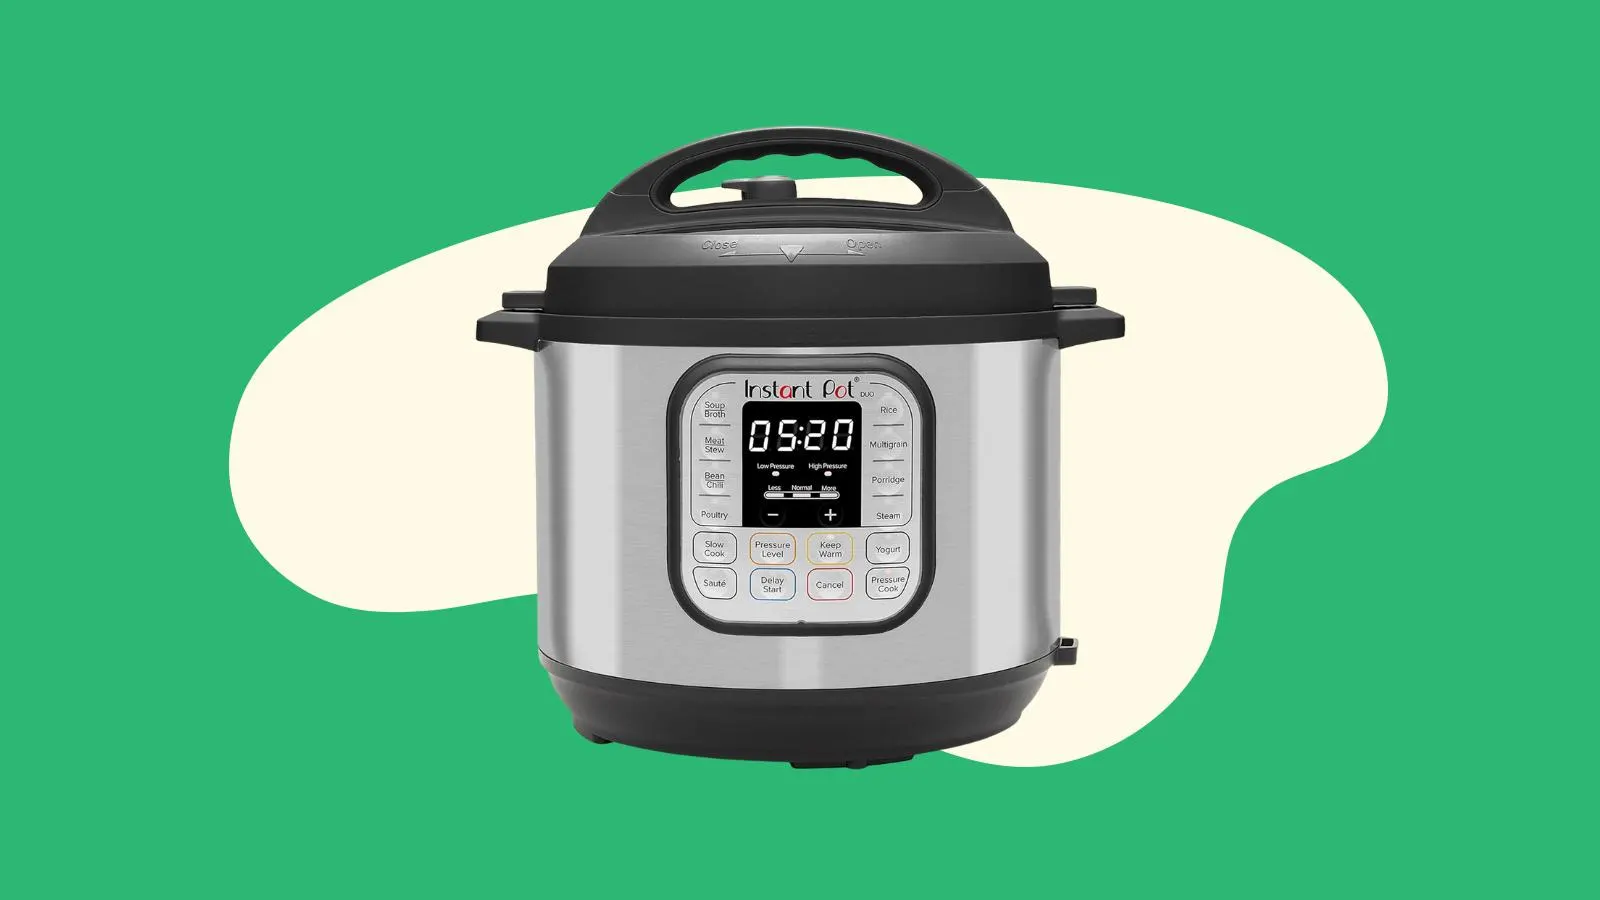 COMFEE' 6 Quart Pressure Cooker 12-in-1, One Touch Kick-Start  Multi-Functional Programmable Slow 